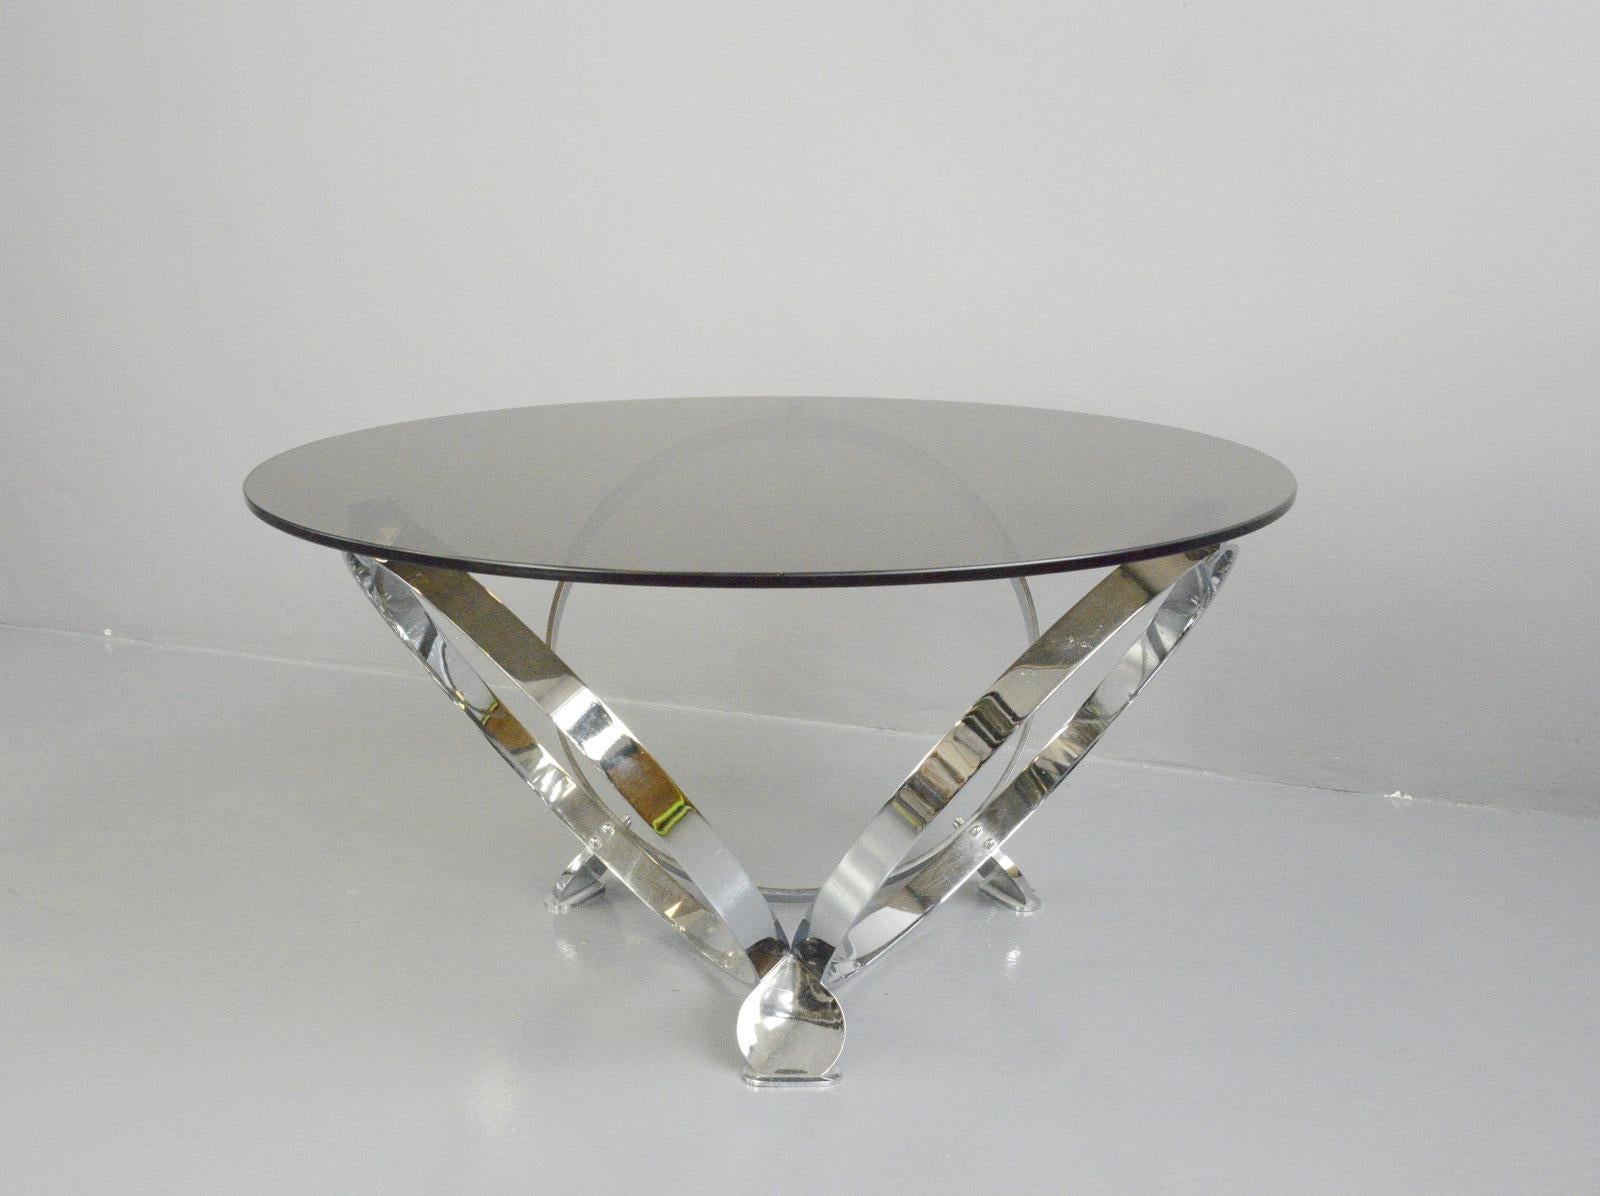 Mid century coffee table by Knut Hesterberg, Circa 1970s

- Circular chromed base
- Heavy smoked glass top
- By Knut Hesterberg
- German, 1970s
- Measures: 100cm wide x 52cm tall

Condition report

Some light scratches to the top and base